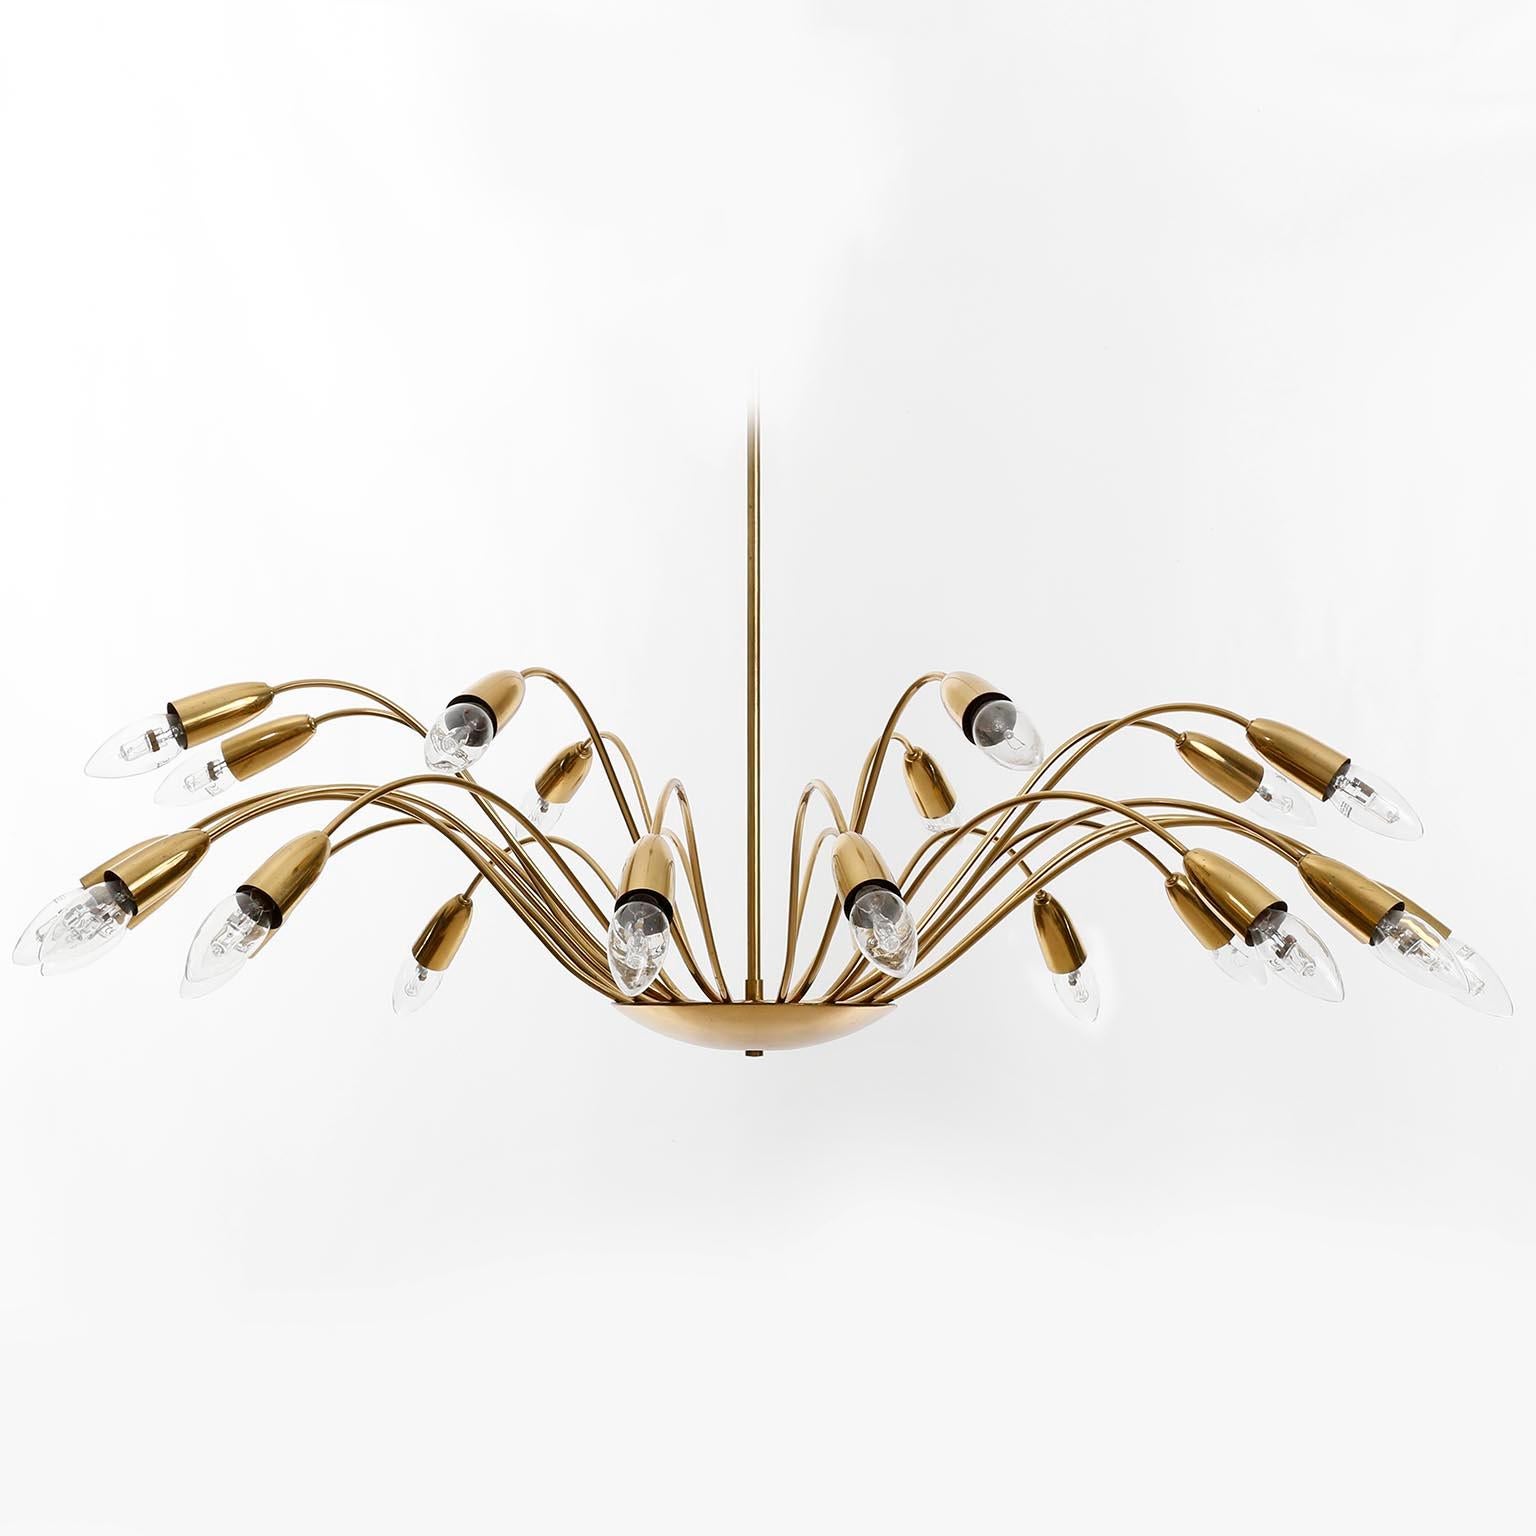 An impressive and extra large Mid-Century Modern brass spider light fixture or chandelier with 24 curved arms attributed to Stilnovo, Italy, manufactured circa 1960 (late 1950s or early 1960s).
The lamp has 24 sockets for small Edison screw base